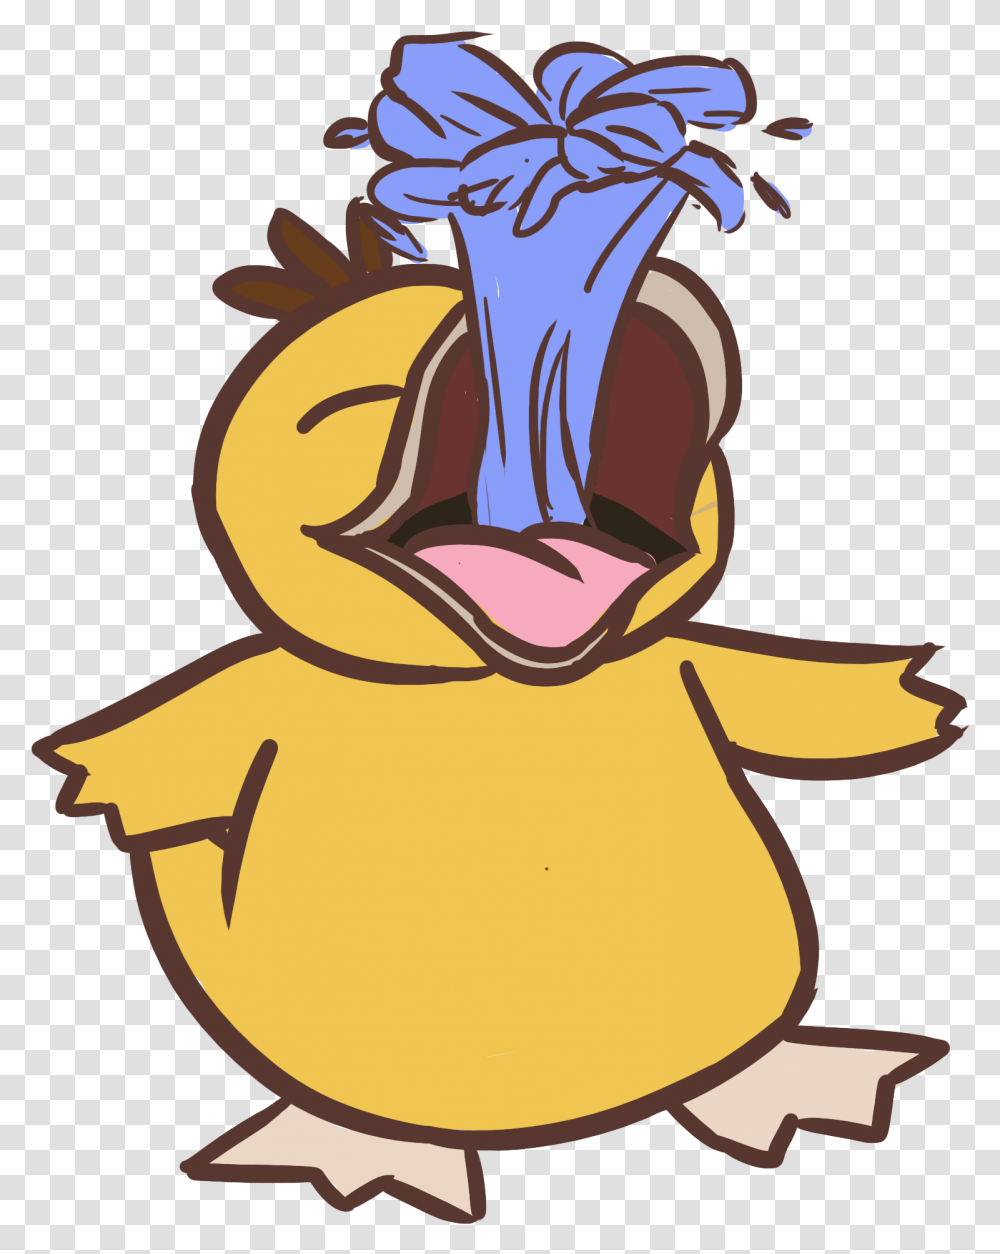 Psyduck Used Water Gun By Cynthistic Psyduck In Water, Animal, Bird, Plant, Food Transparent Png